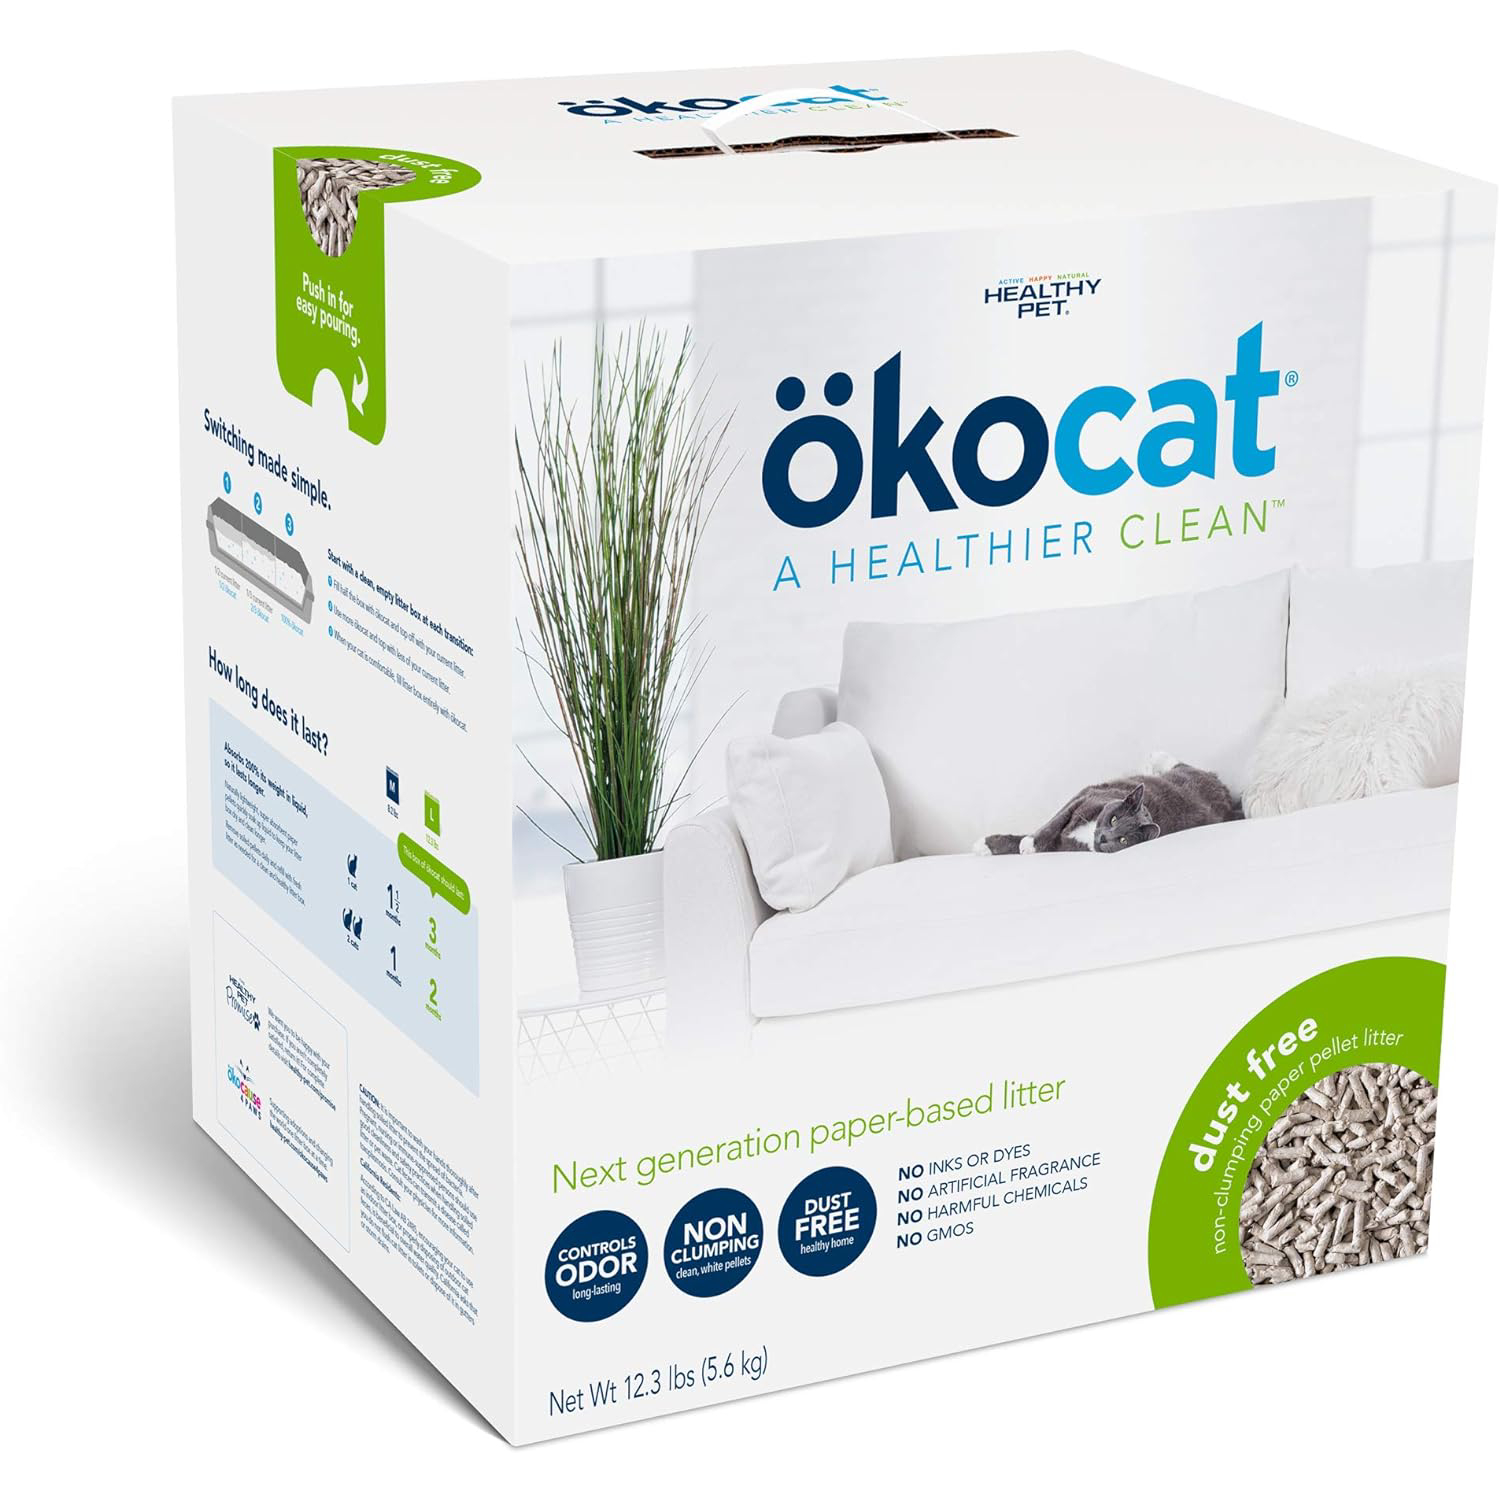 ökocat Dust-Free Natural Paper Non-Clumping Cat Litter Pellets with Odor Control, Large, 12.3 lbs new